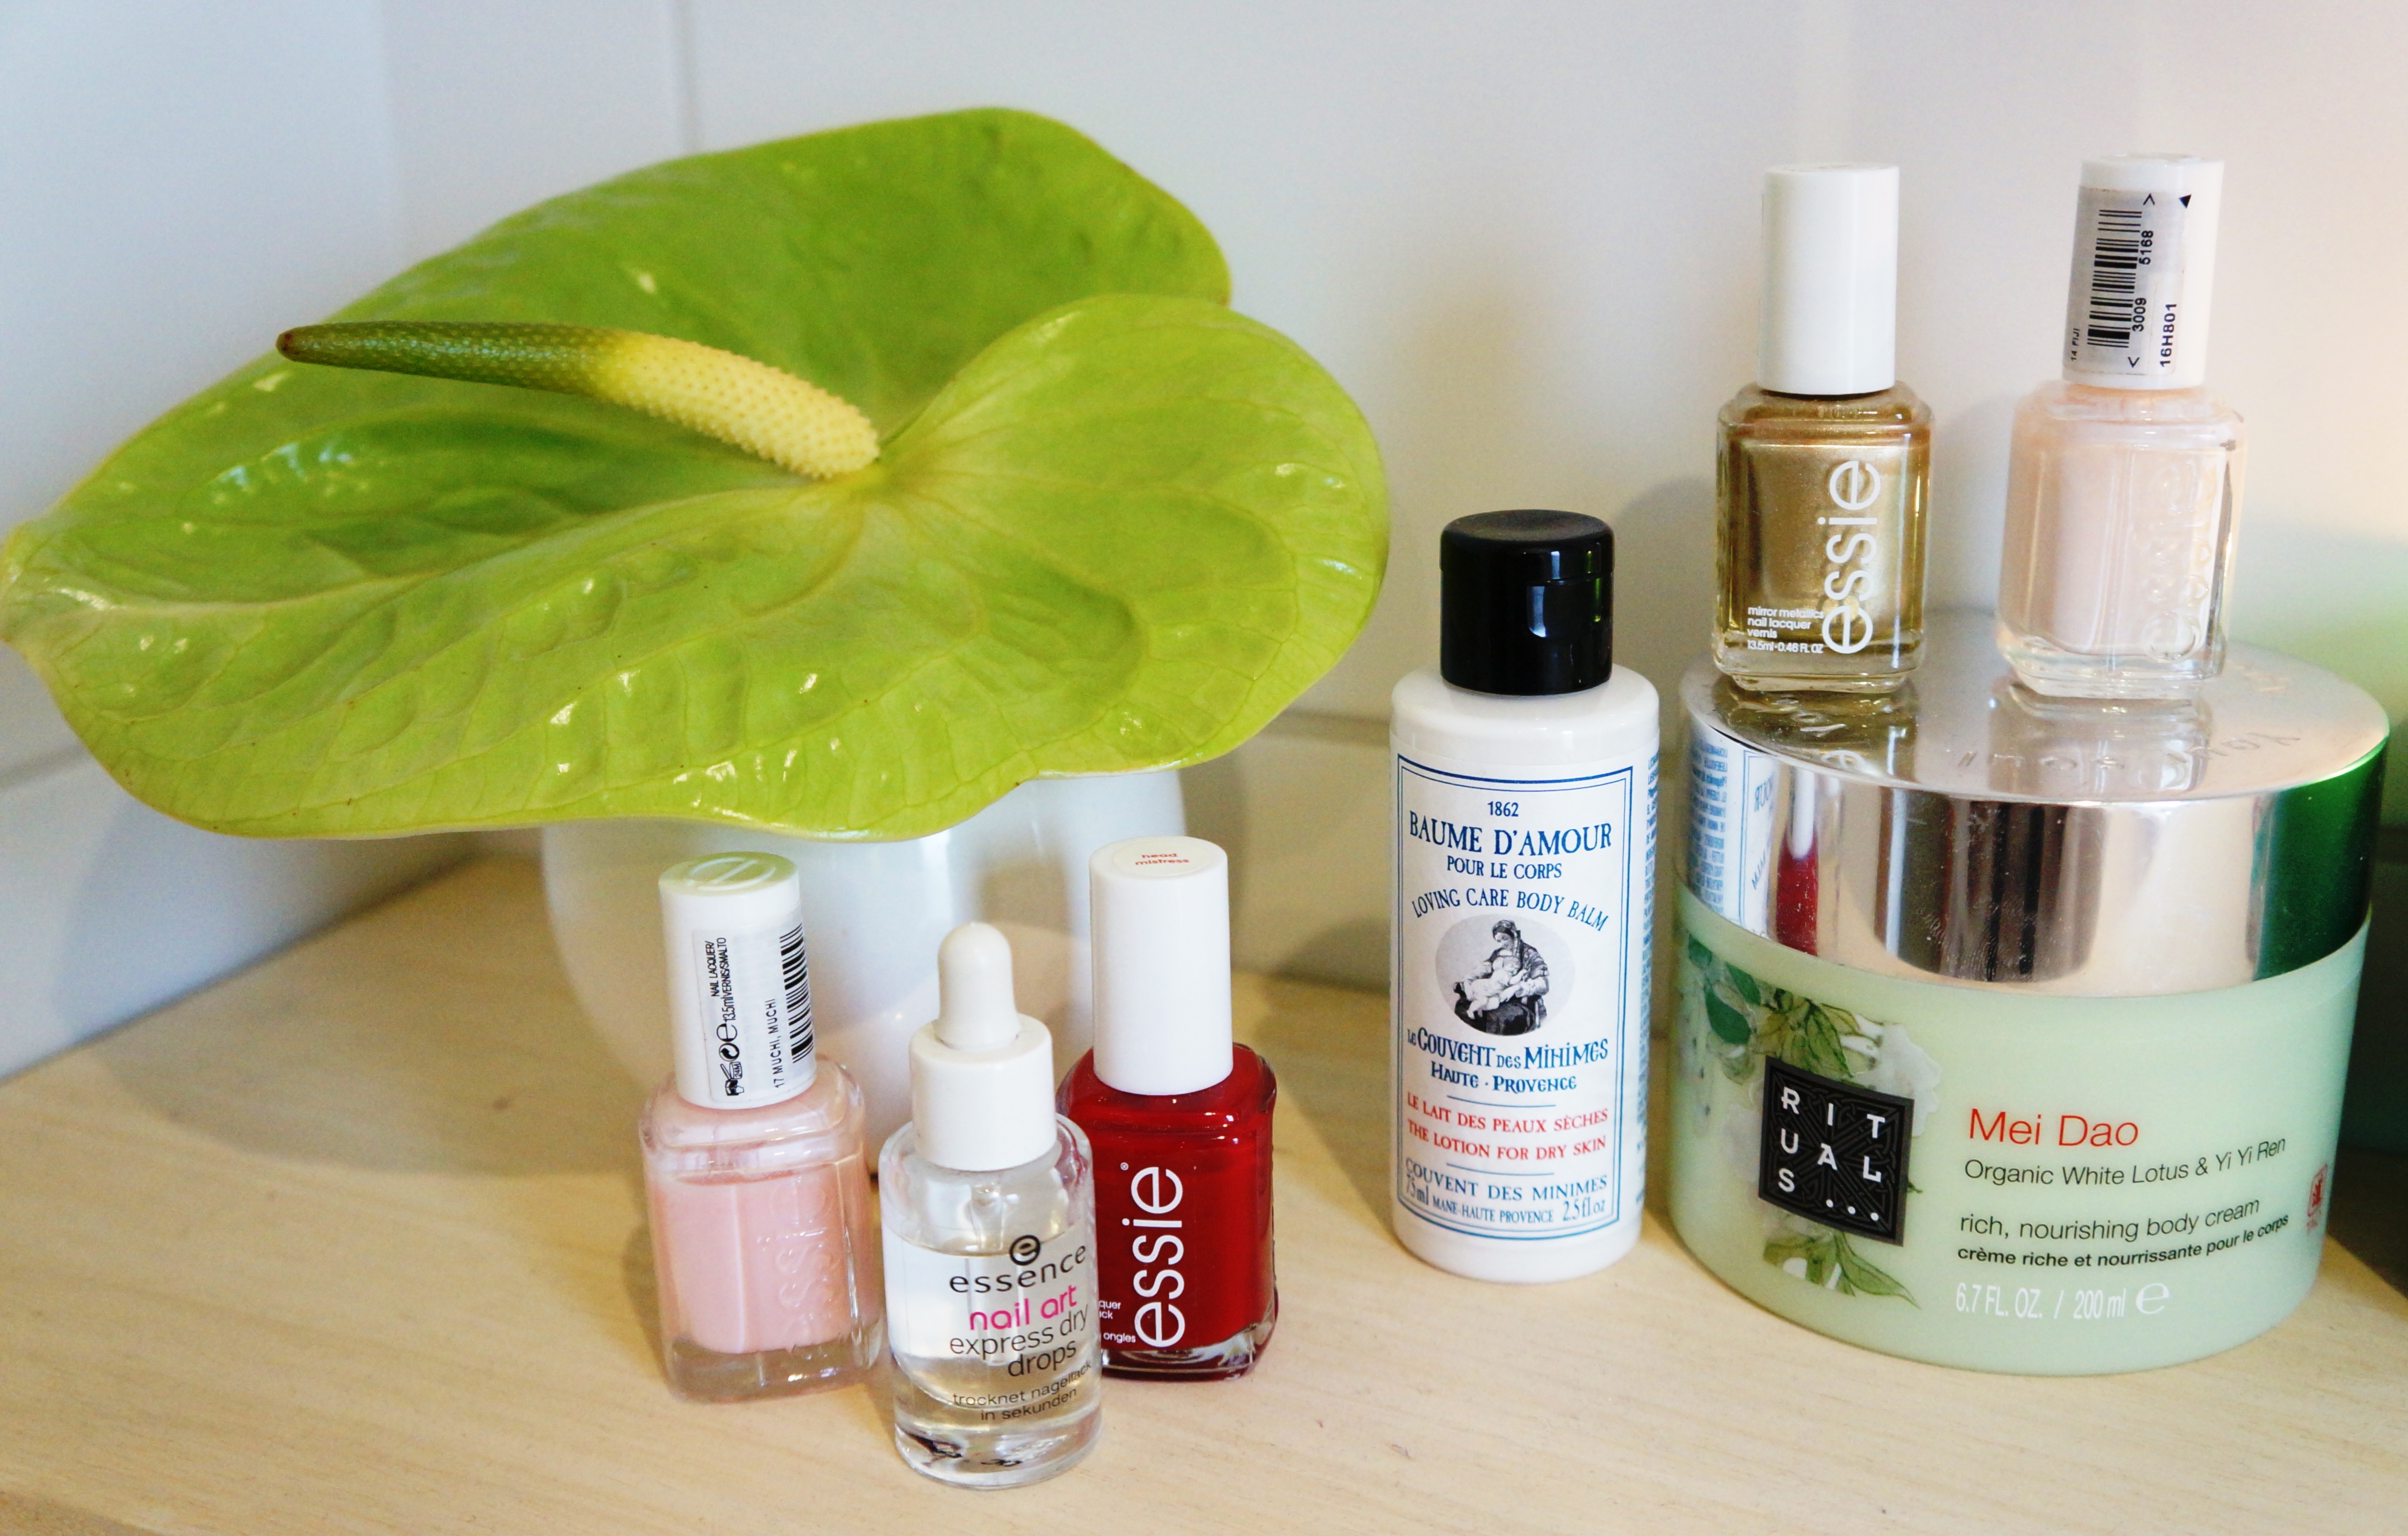 Nail products favourites/ Pic by kiwikoo